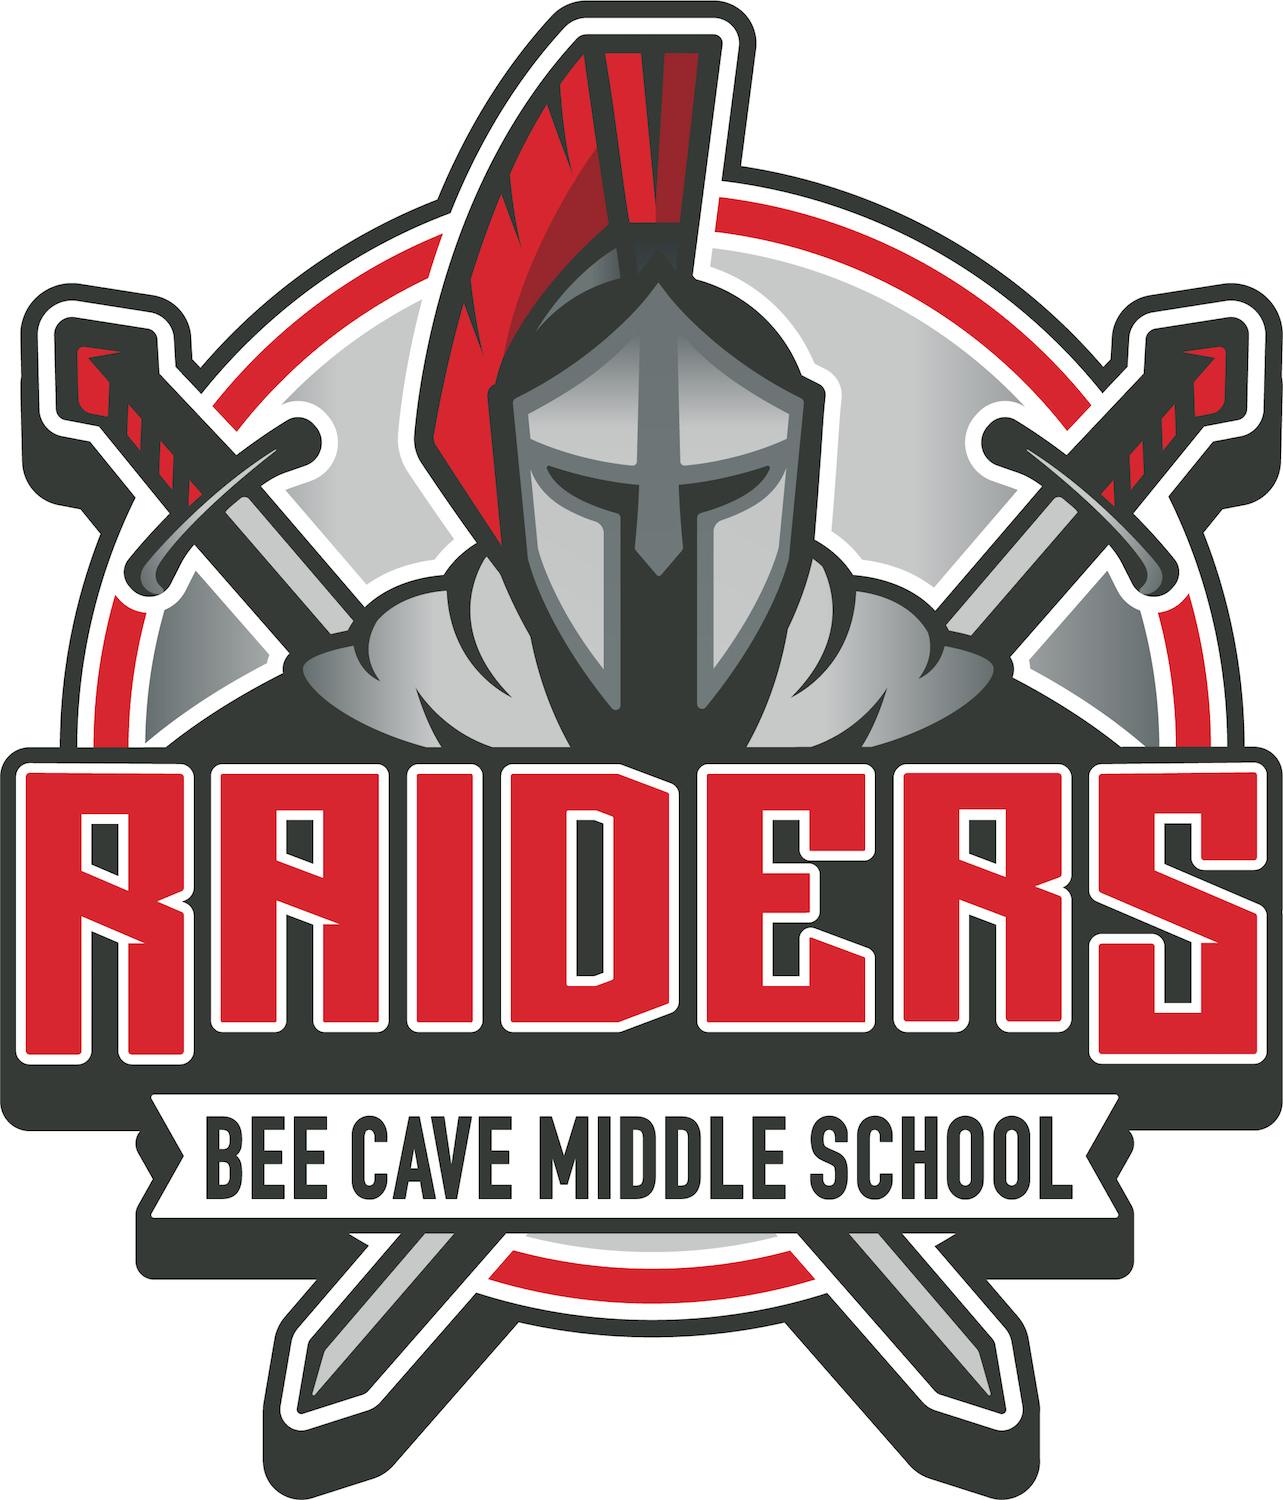 Cave Logo - New Bee Cave Middle School seal and logo unveiled. Community Impact